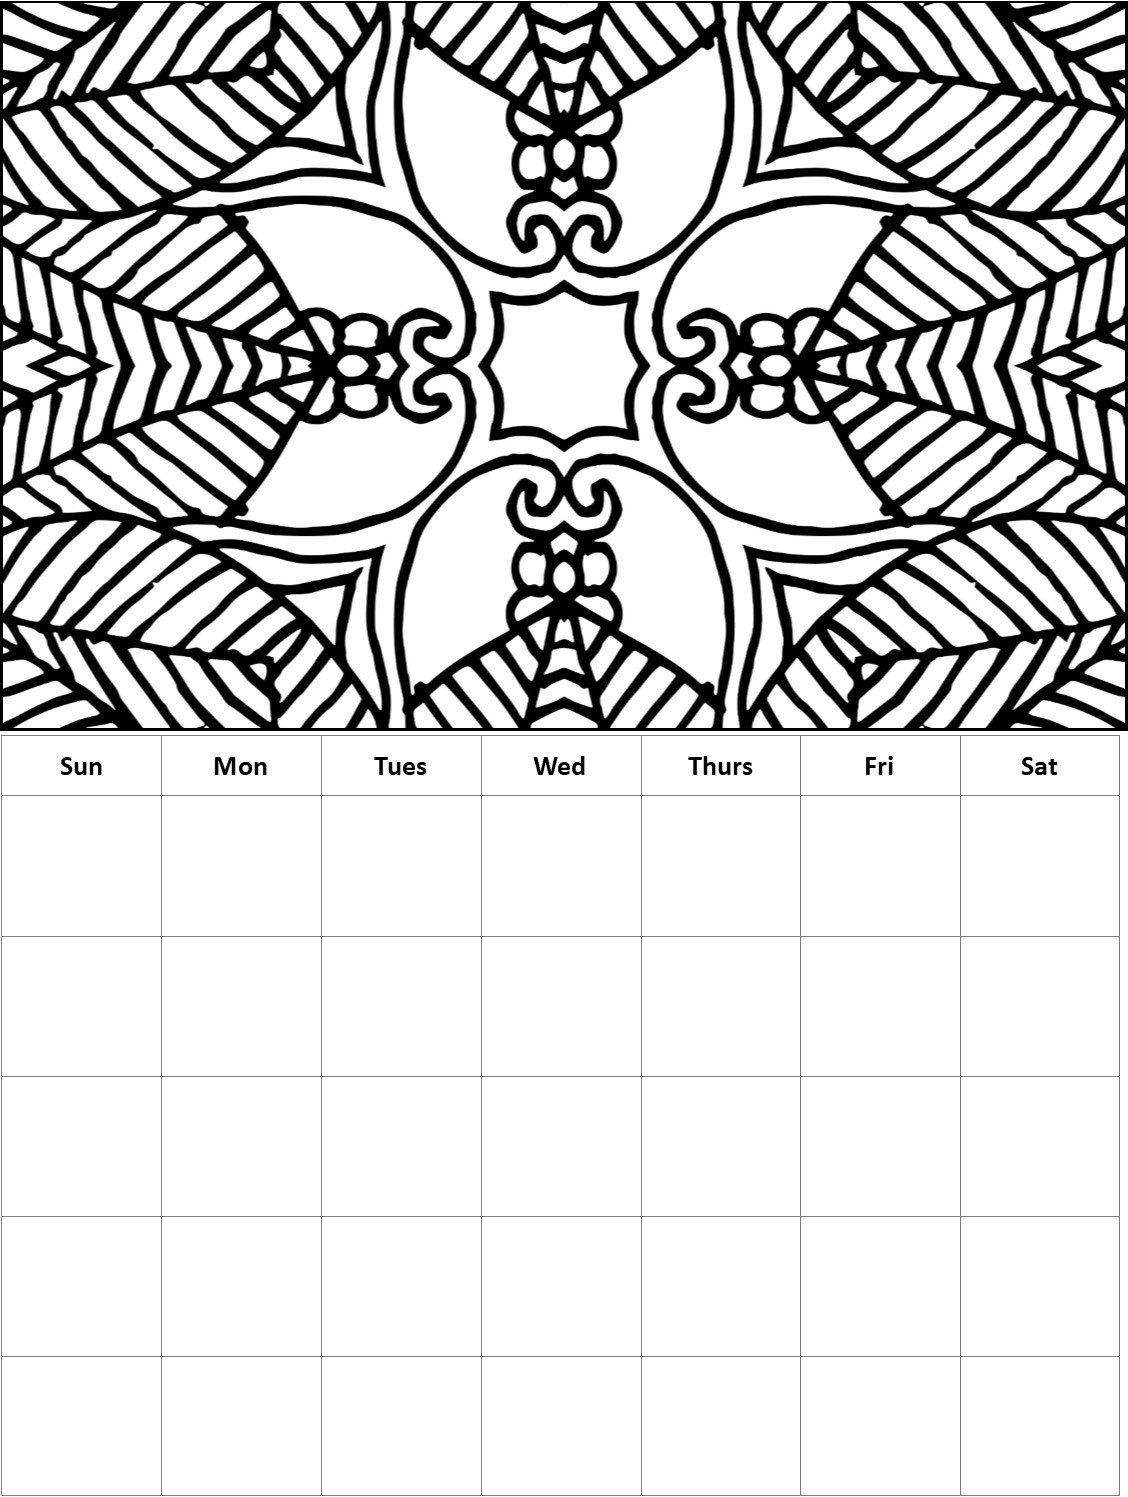 Monthly Coloring Calendars 12 Coloring Calendar (Instant Download) Etsy